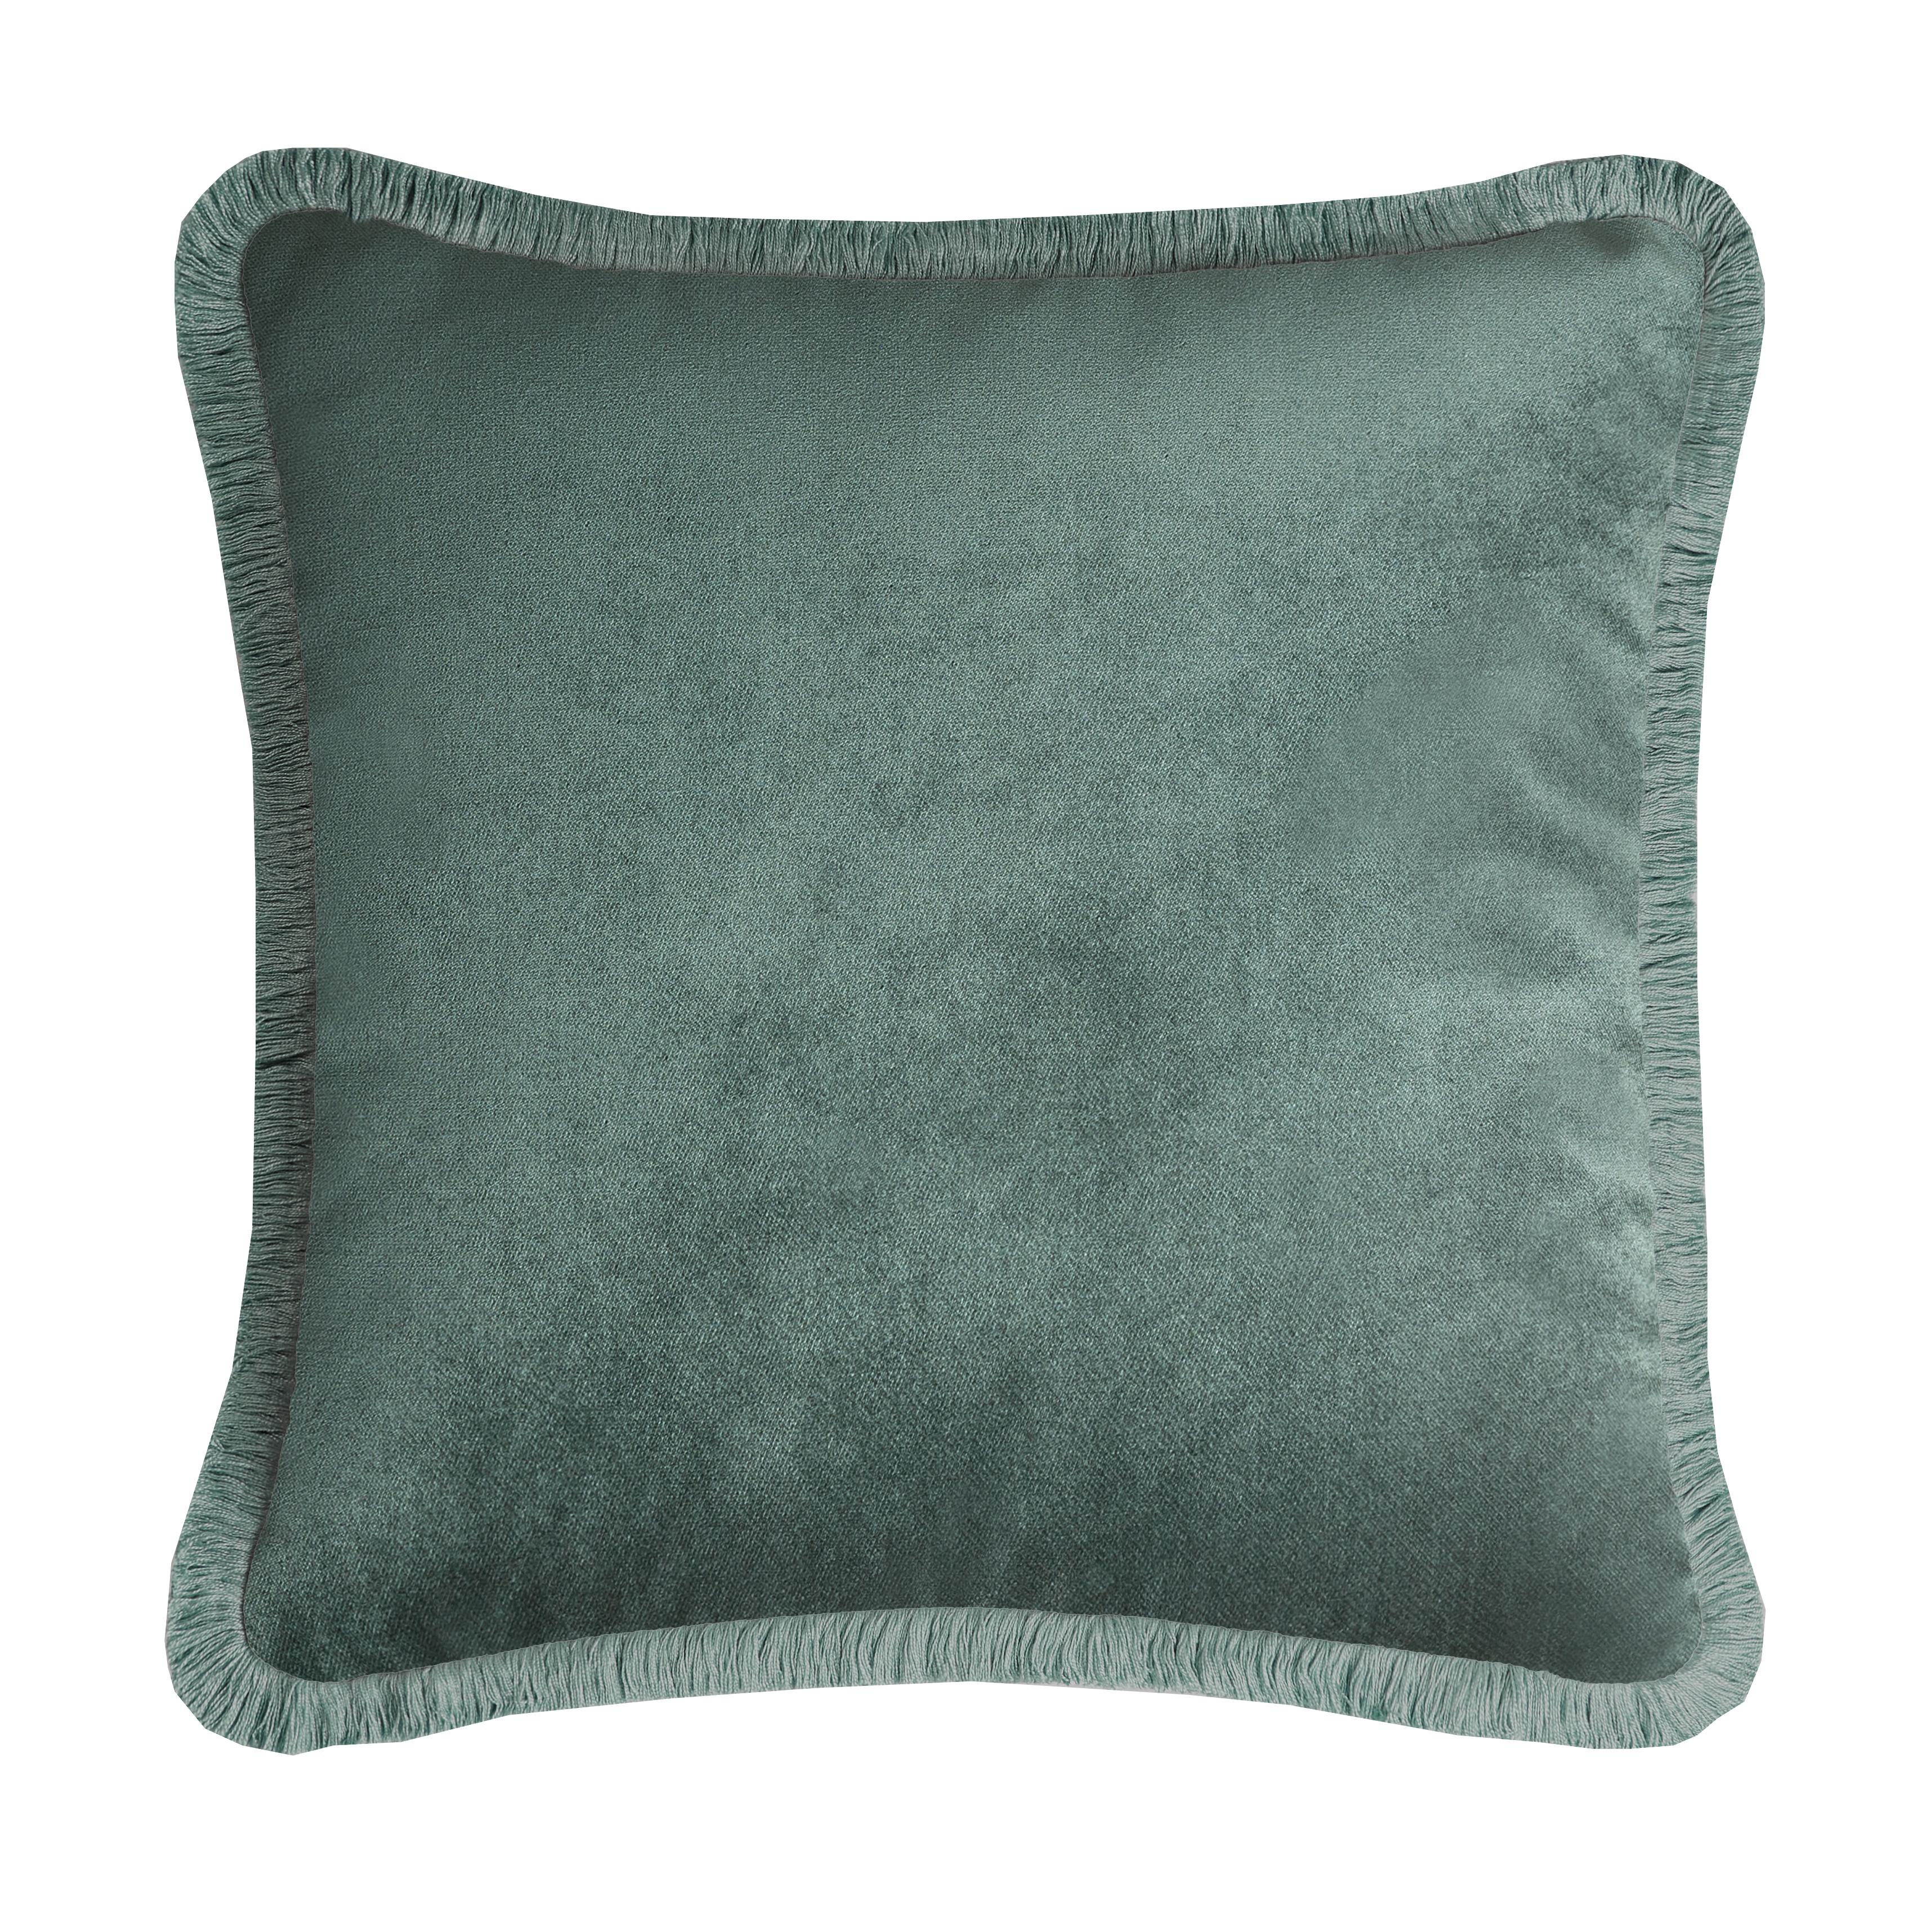 This exquisite square cushion will suit any decor with its neutral tones and refined allure. Padded with polyester fiber, the velvet removable cover boasts an elegant white color accented with a border of teal trimming, resulting in an undoubtedly